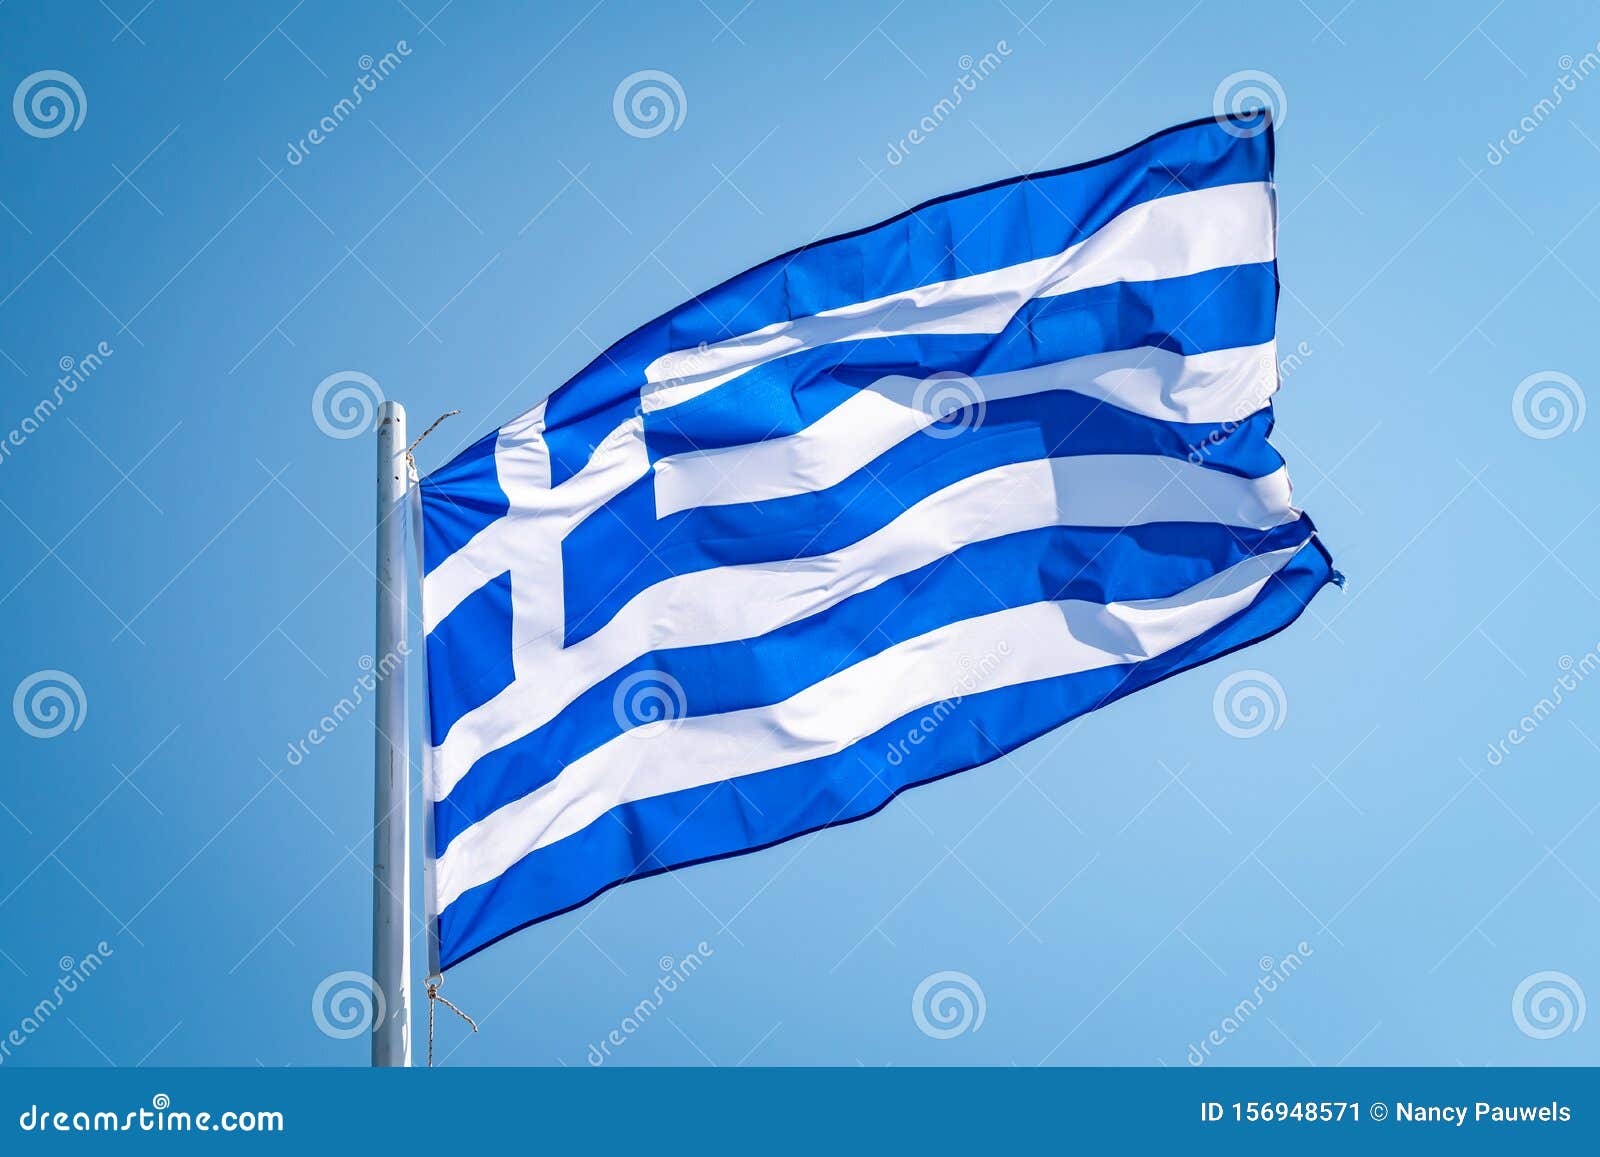 Flag of Greece Waving in the Wind Front of Blue Sky Image - Image culture, concept: 156948571